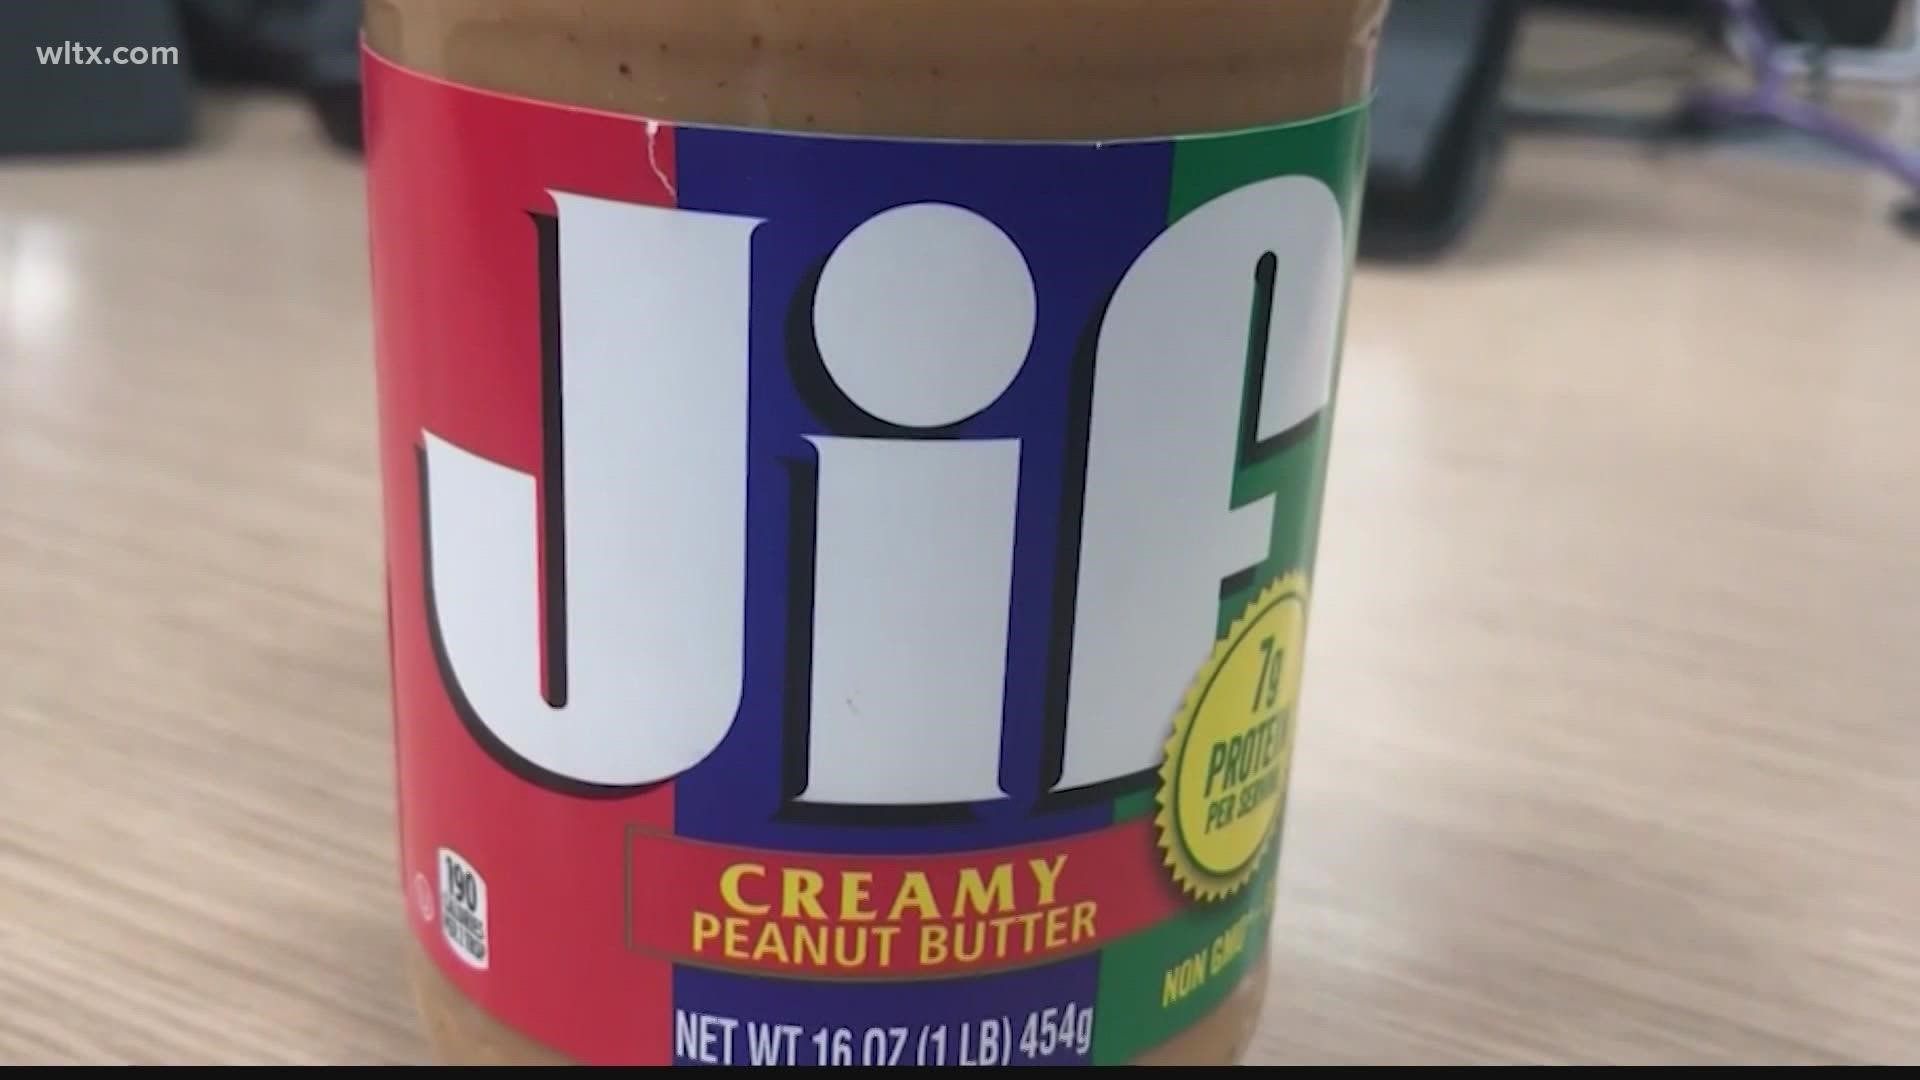 The CDC has declared a multi-state salmonella outbreak linked to JIF brand peanut butter is over.